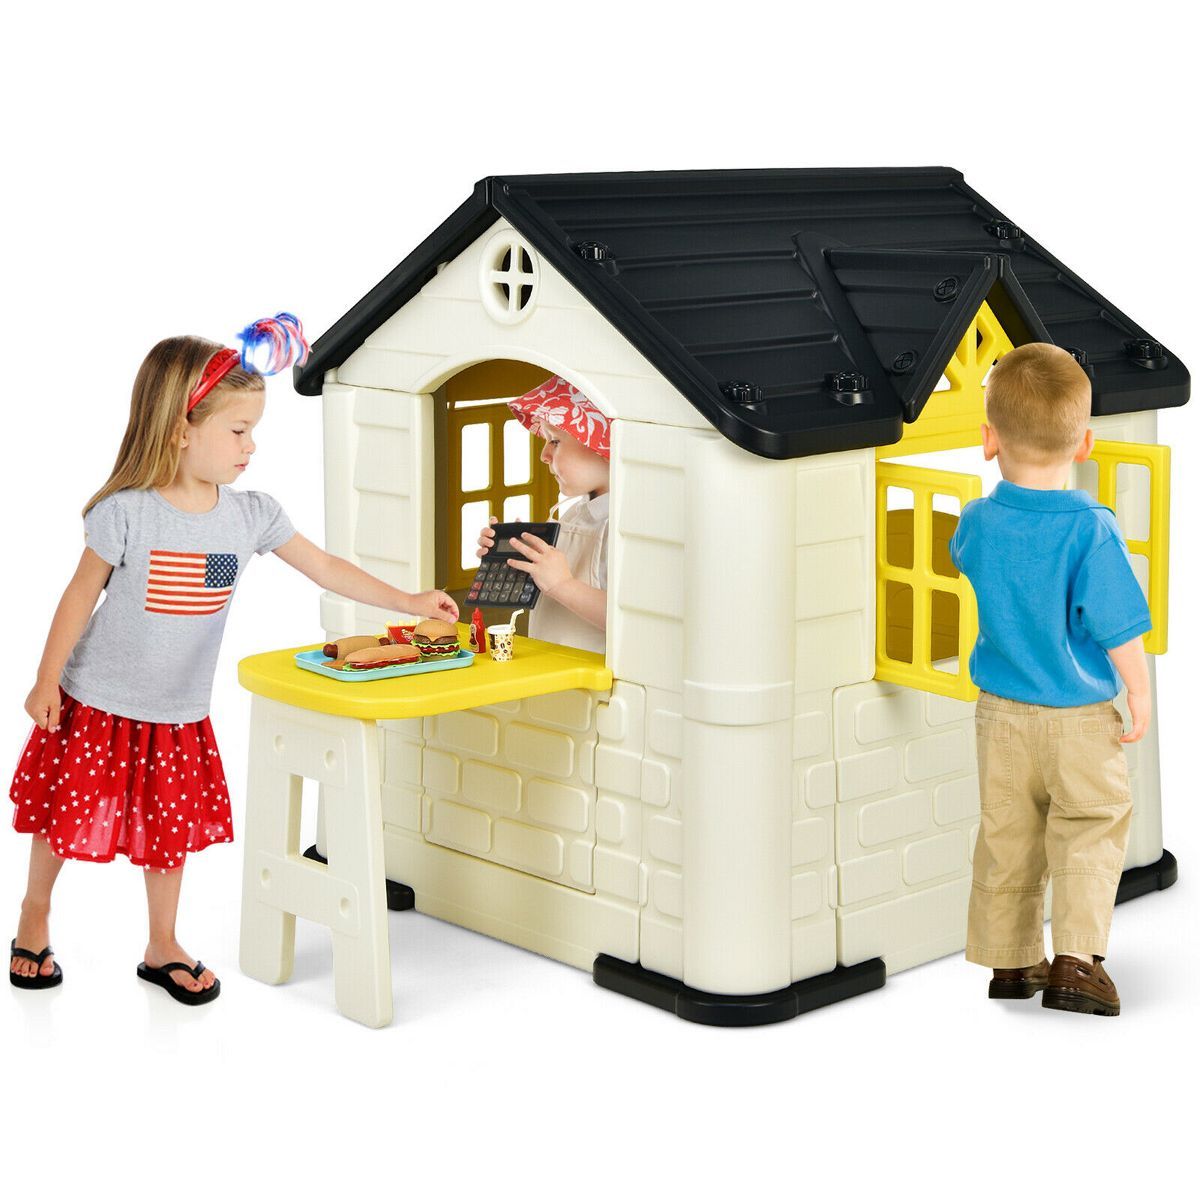 Costway Kid's Playhouse Games Cottage w/ 7 PCS Toy Set & Waterproof Cover | Target